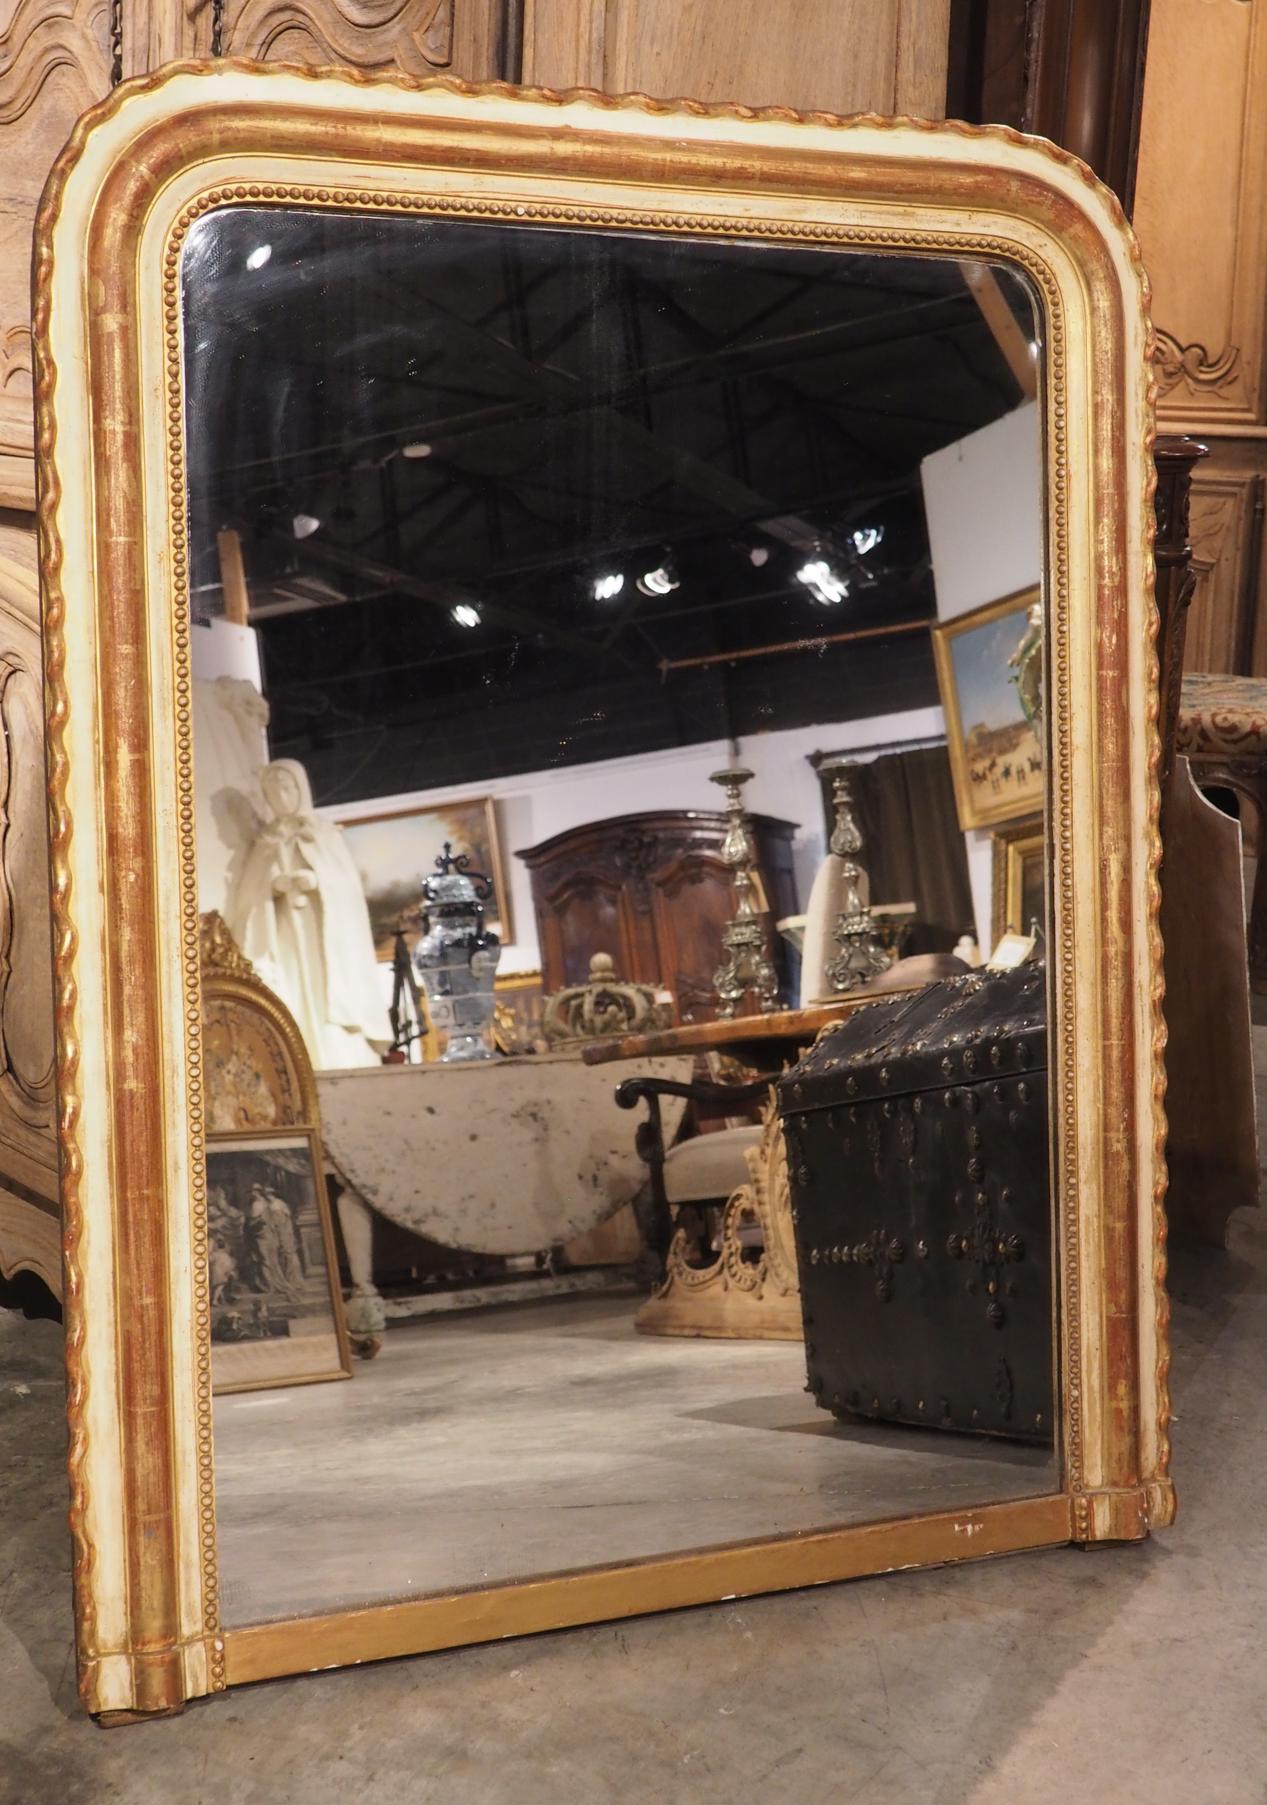 A fine 19th century antique French mirror Louis-Philippe : AnticSwiss